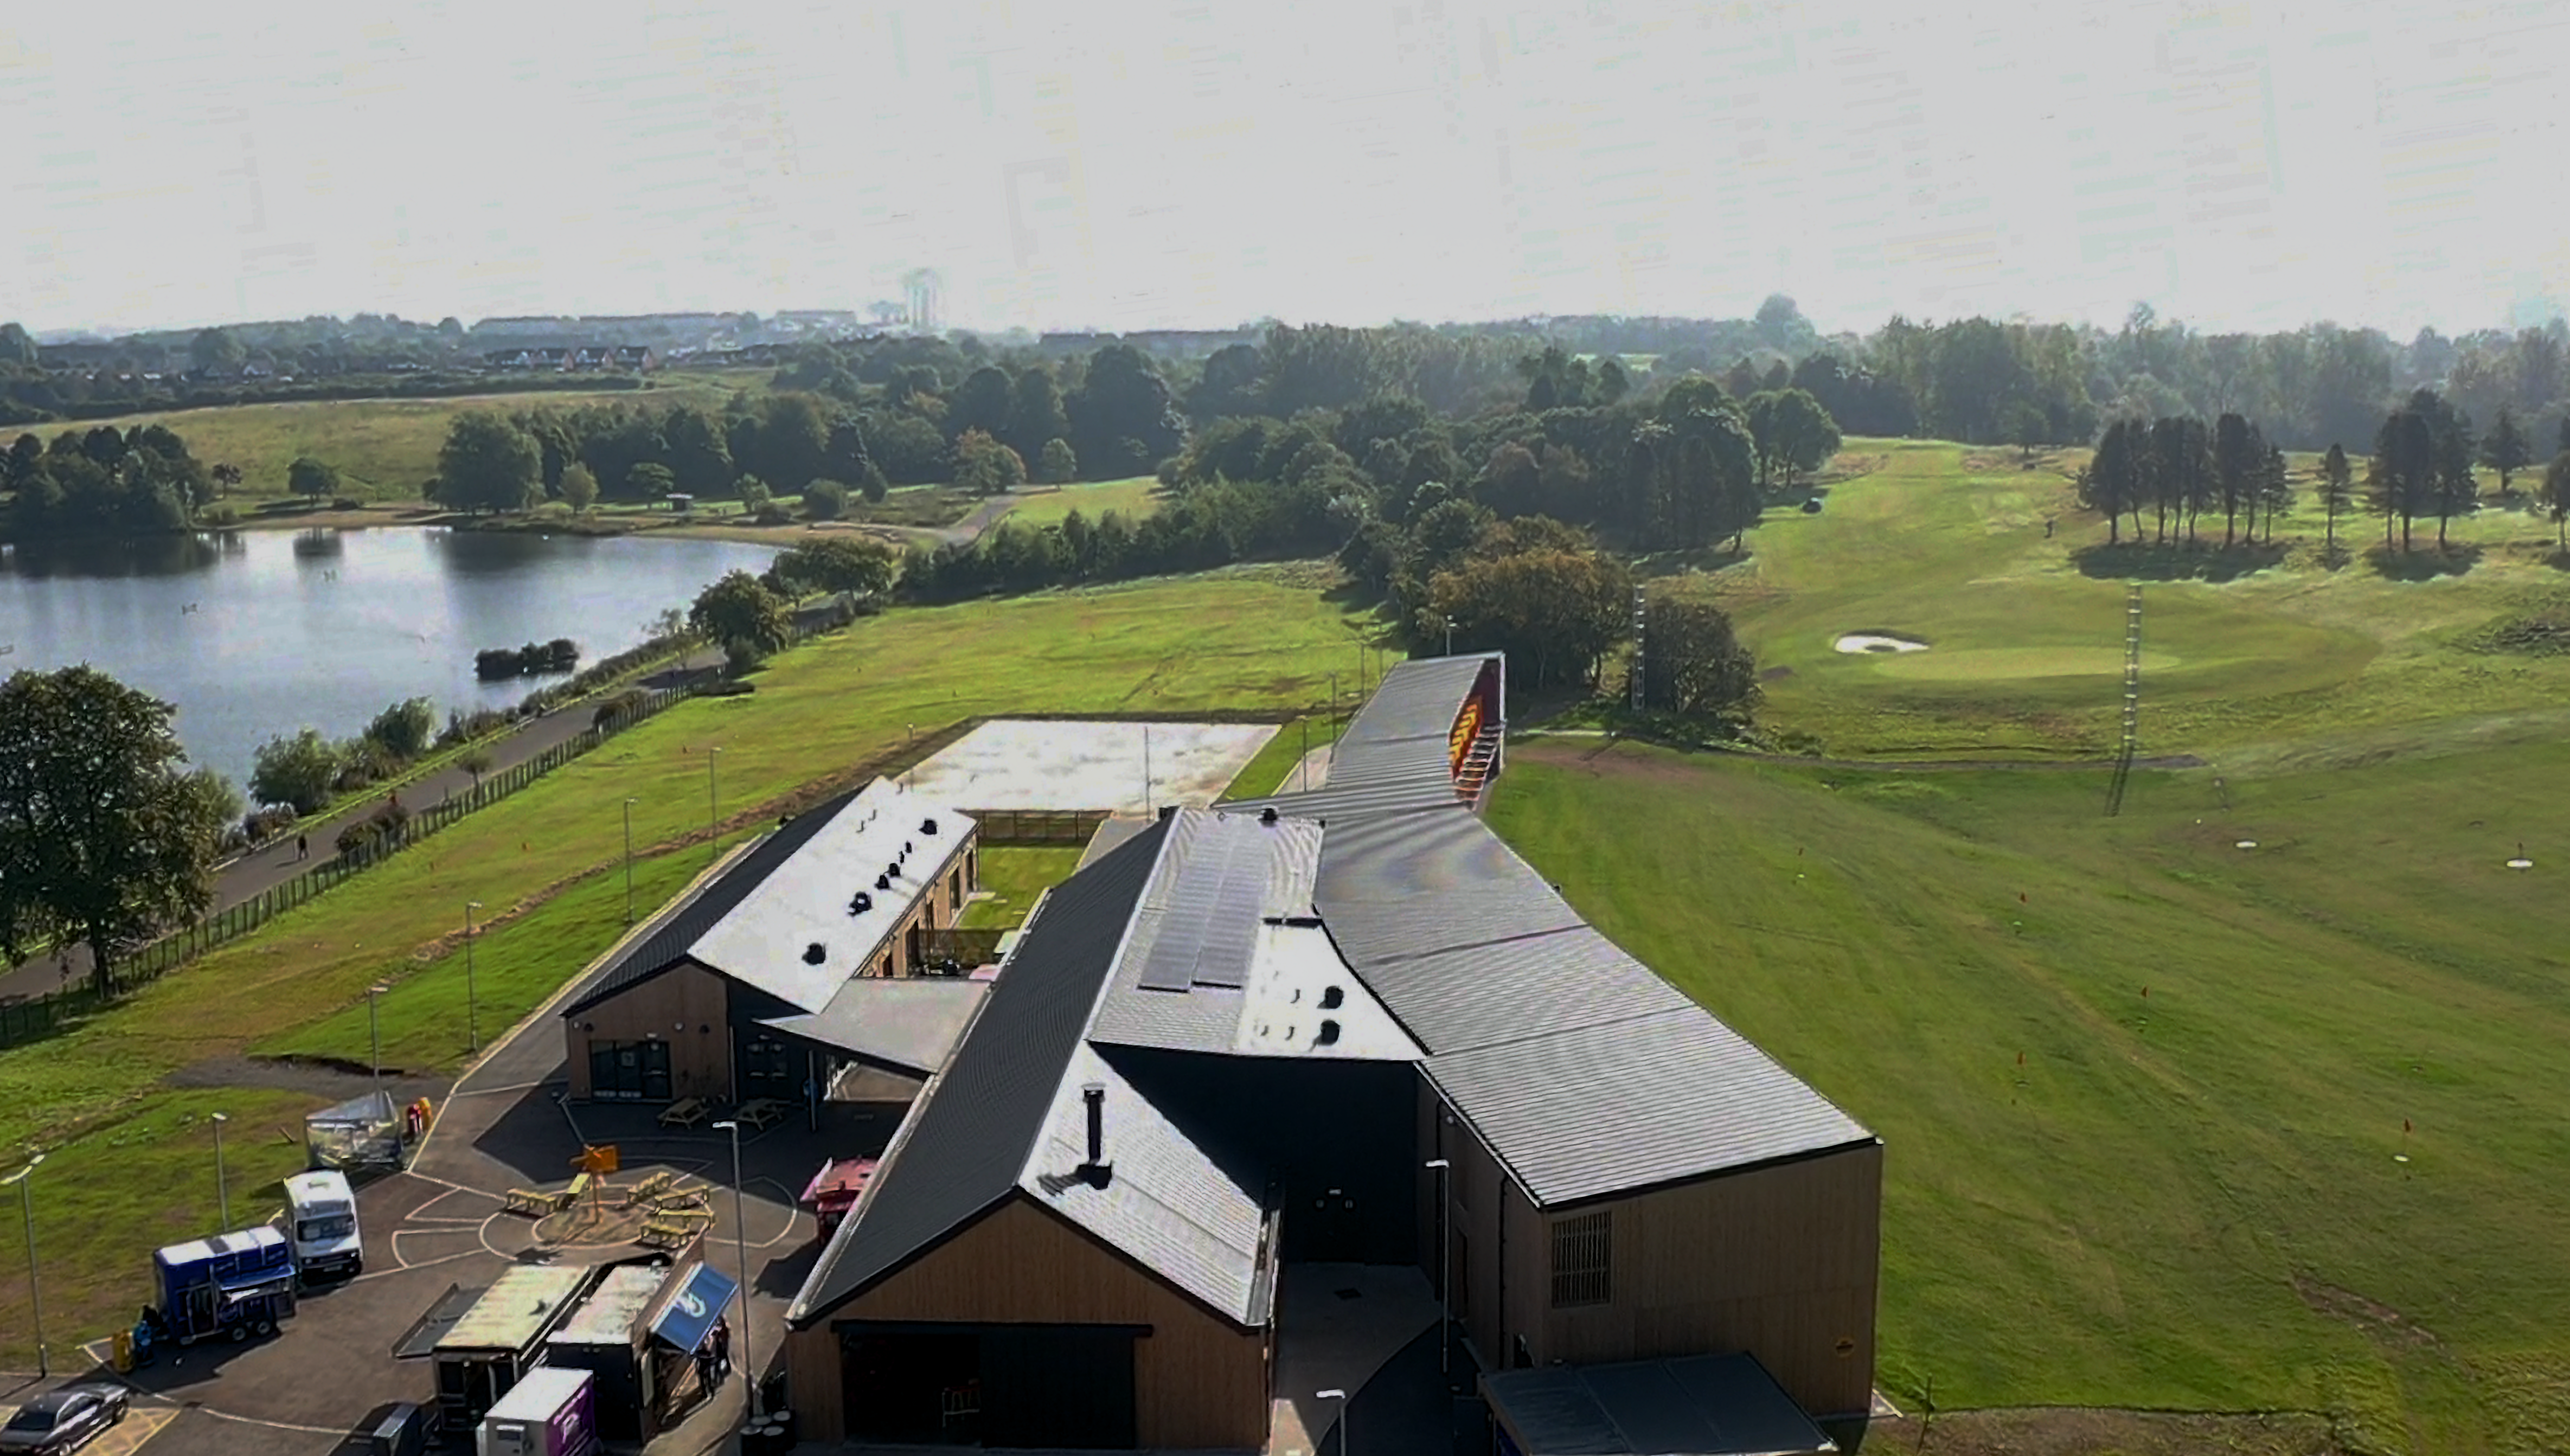 Aerial view of the 'Golf it! golf course in Glasgow, which is set in a stunning landscape with a lake and an extensive golf course. The buildings are clad with PREFALZ in P.10 Black. This view demonstrates the adaptability and aesthetic quality of PREFA aluminium products in a natural environment.